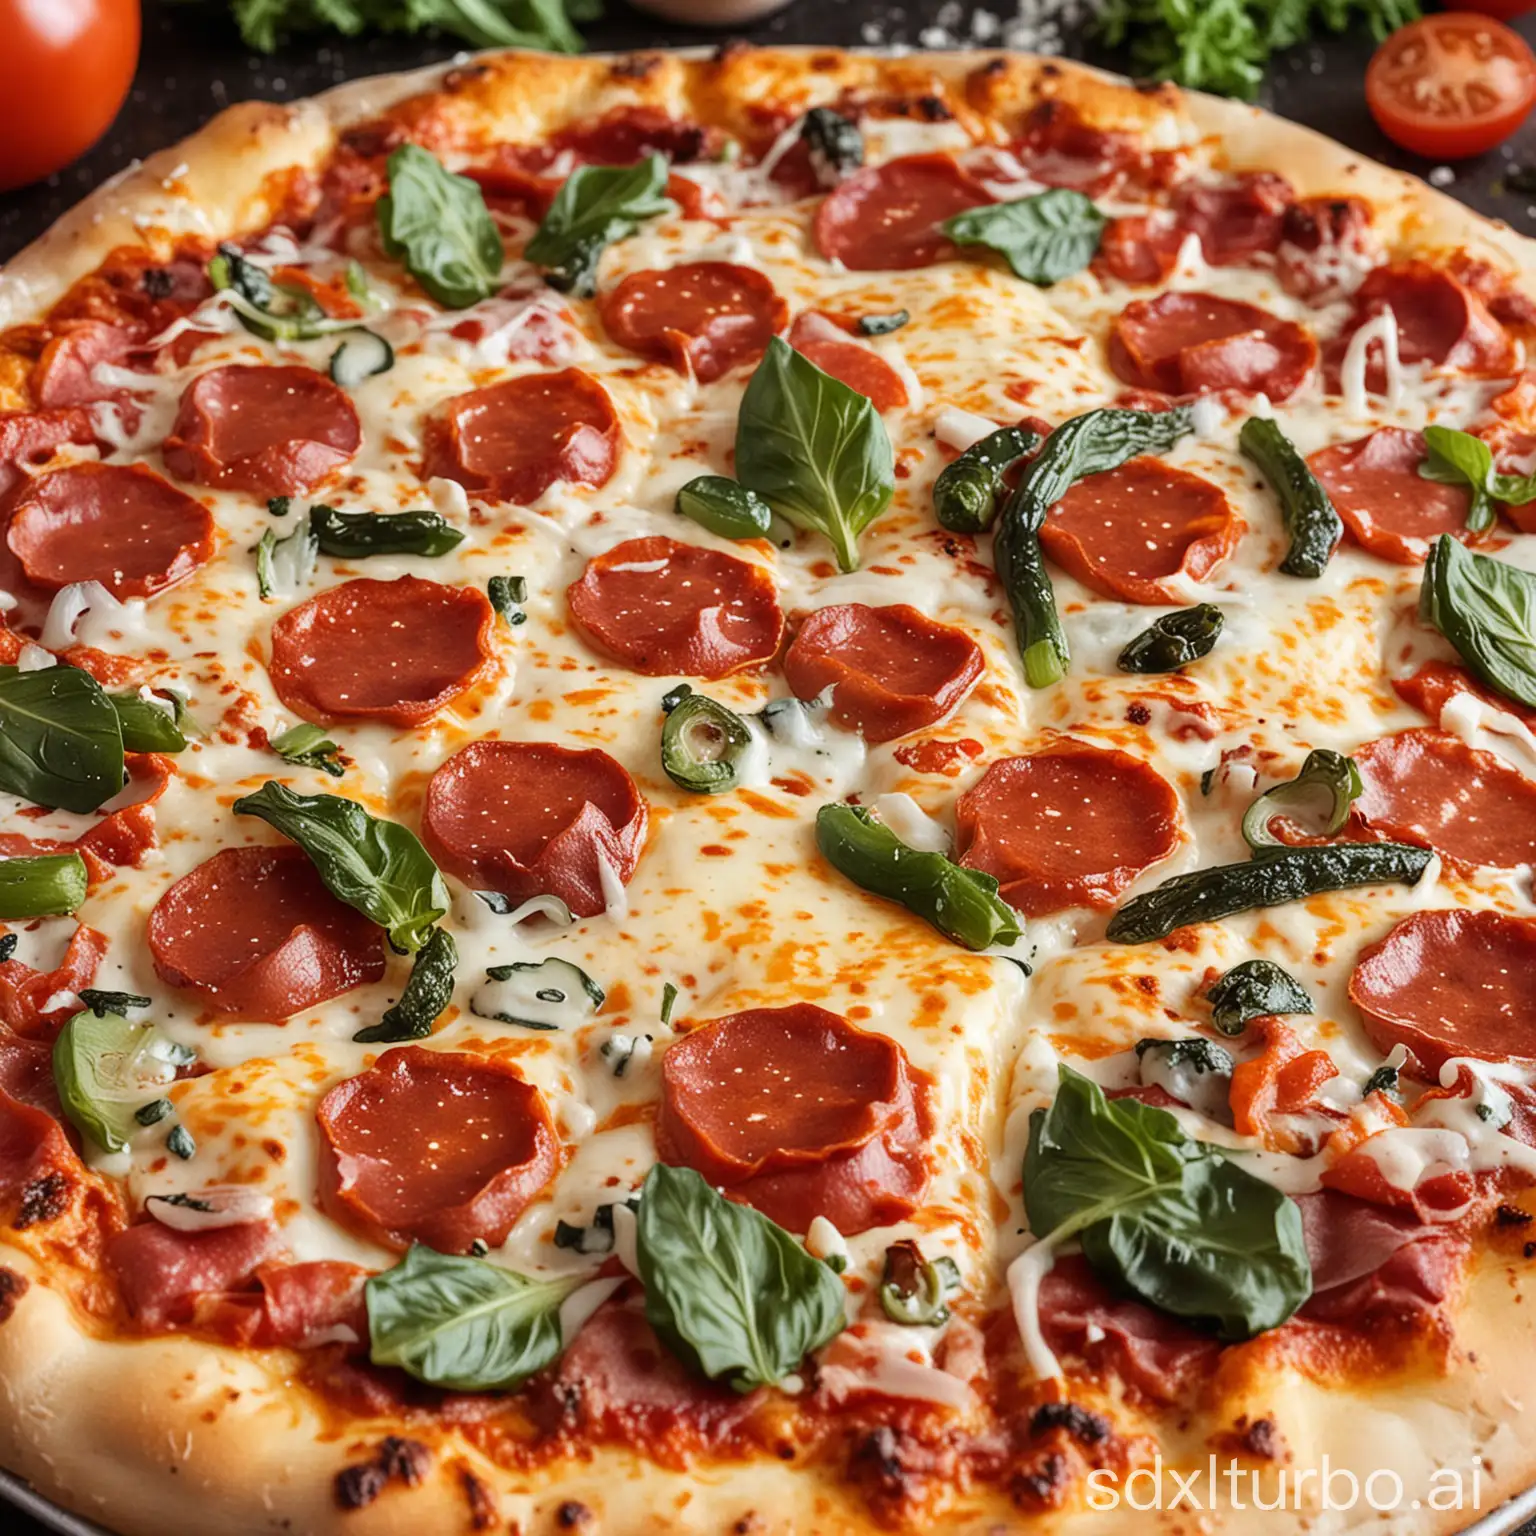 Delicious-Pepperoni-Pizza-with-Melted-Cheese-and-Fresh-Vegetables